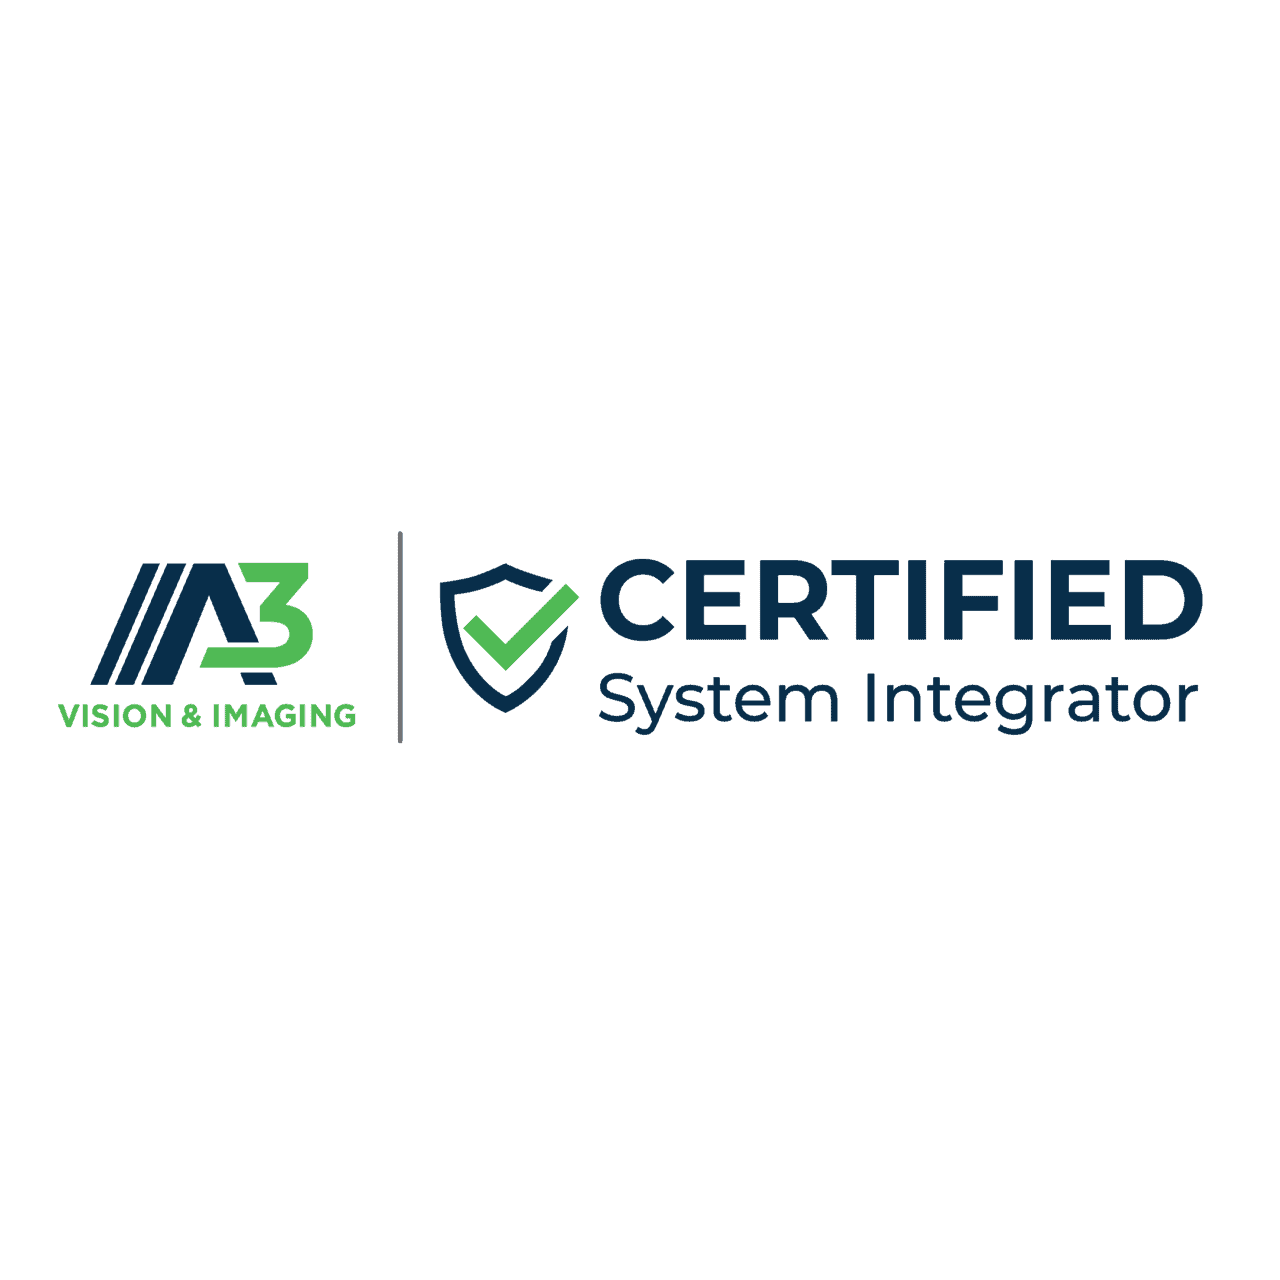 A3 Vision and Imaging - Certified System Integrator badge